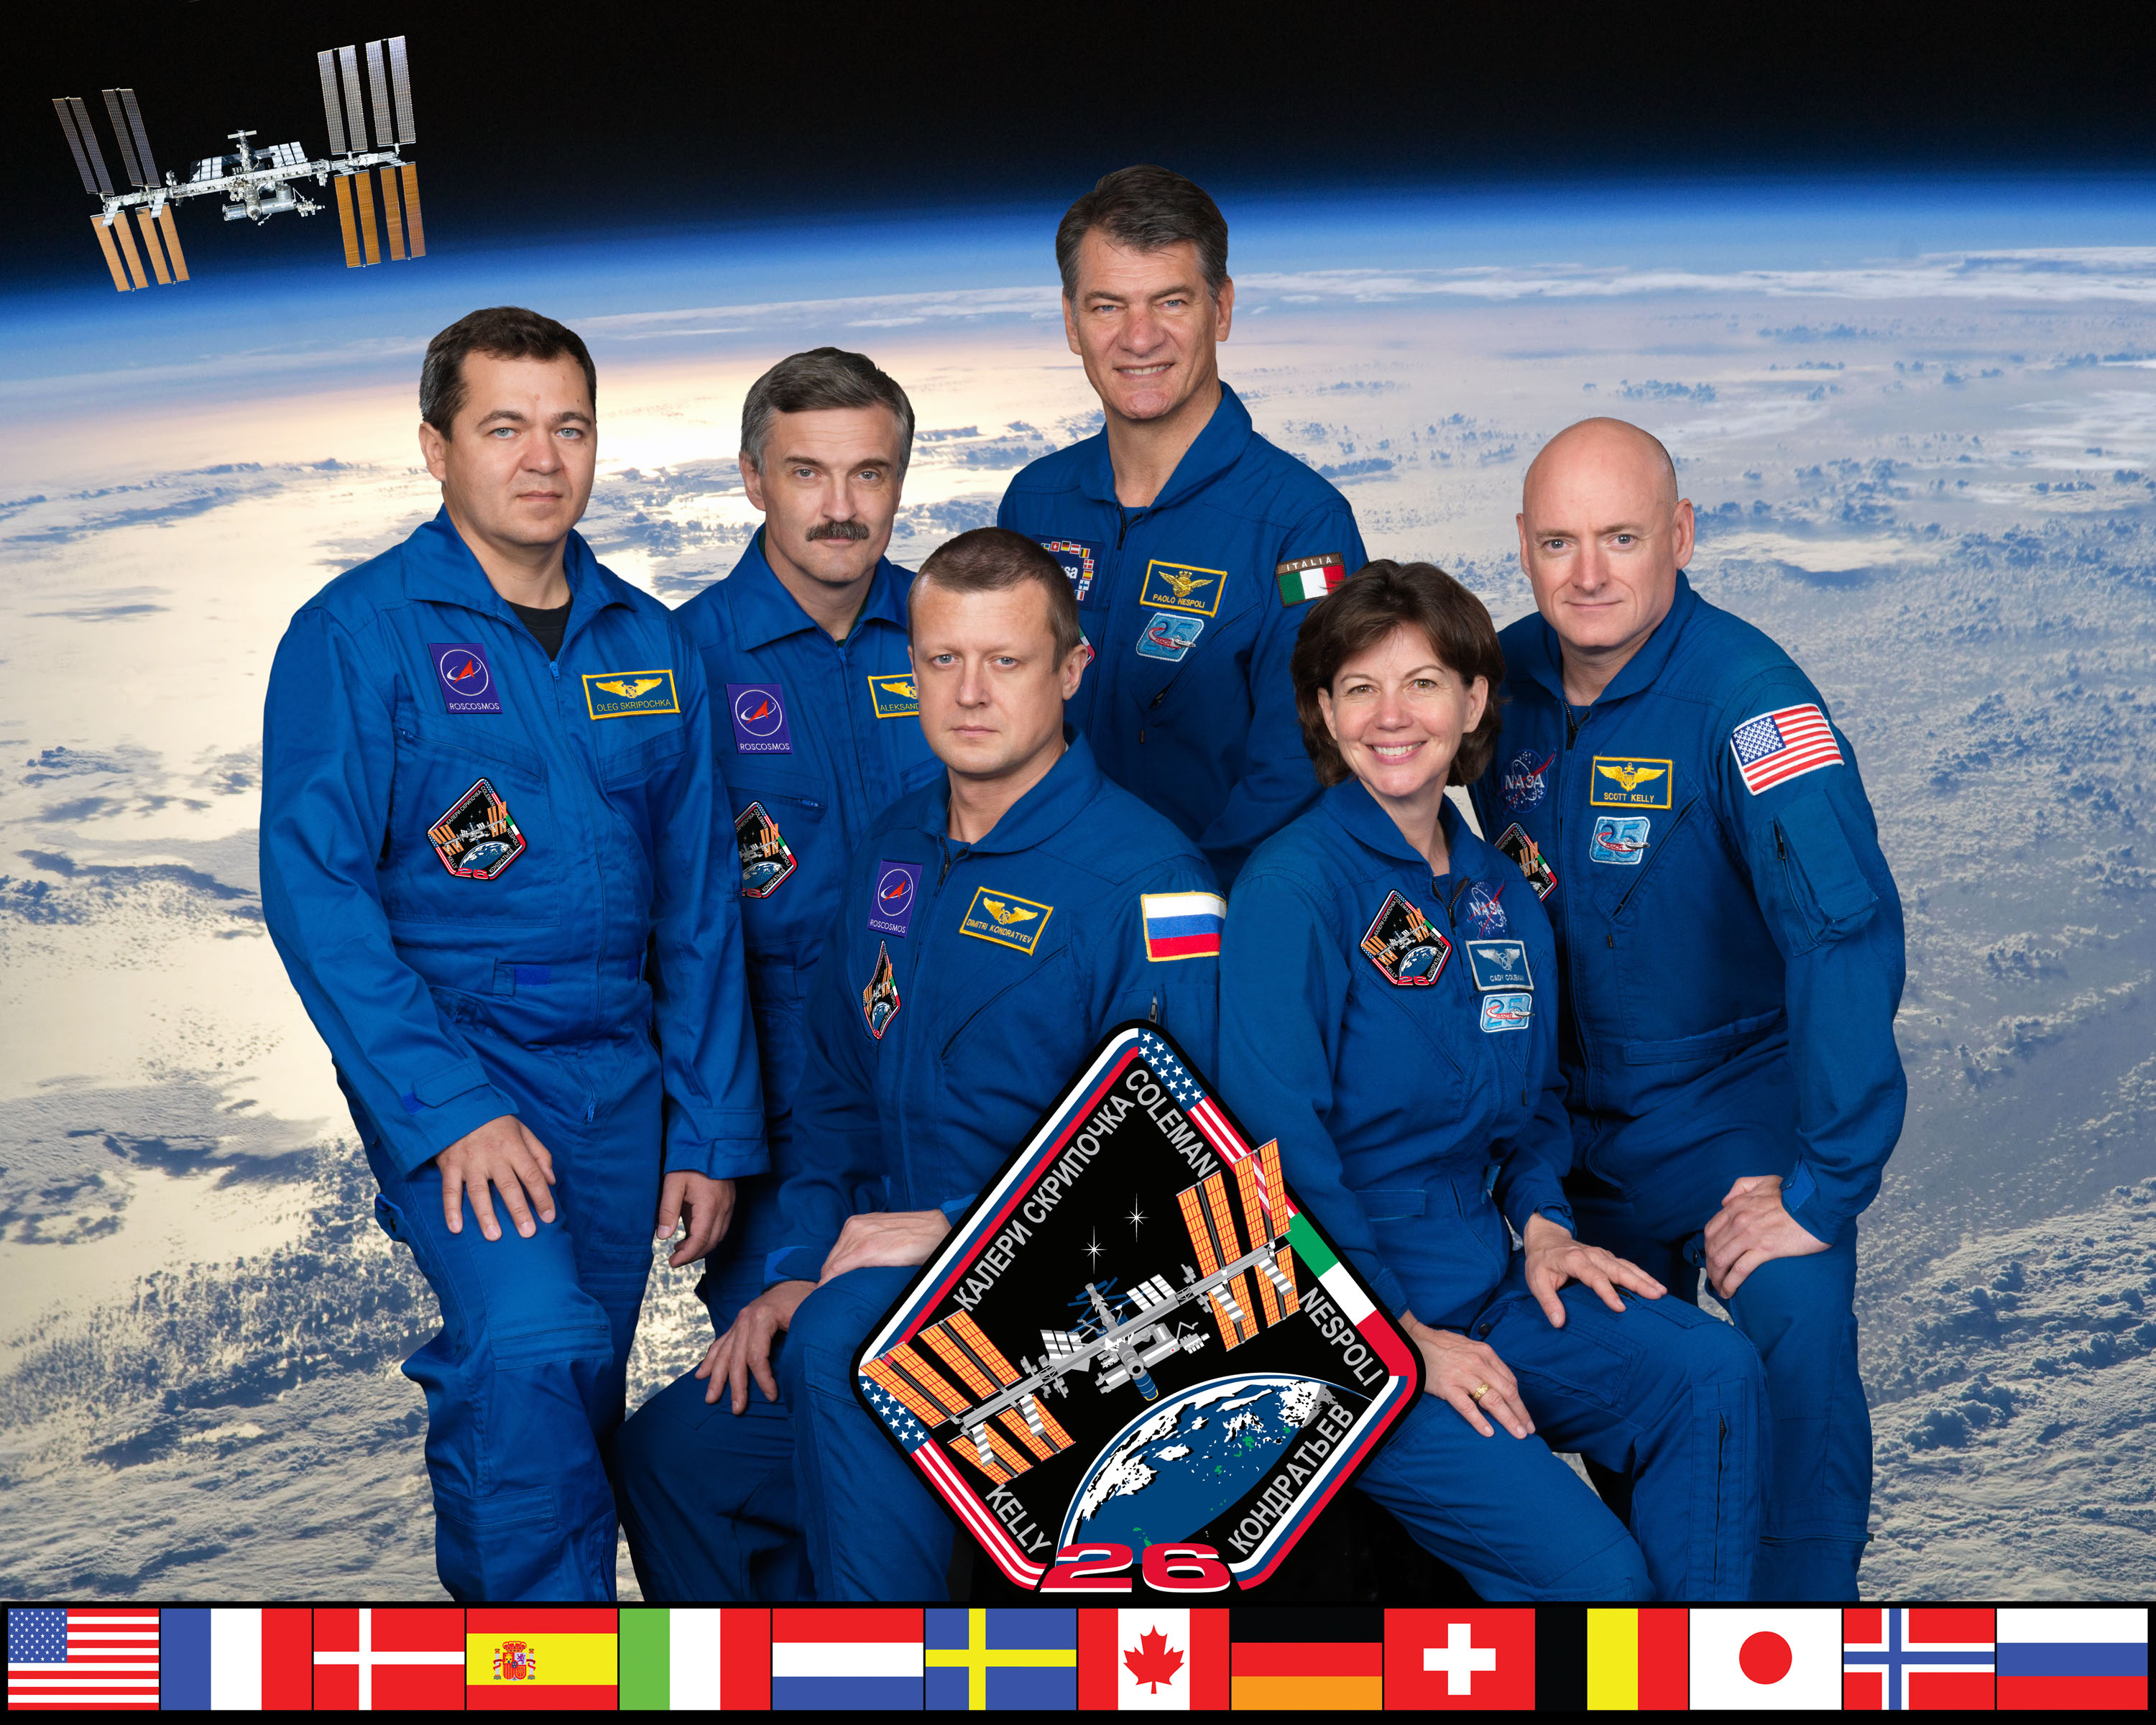 Expedition 26 Official Crew Portrait